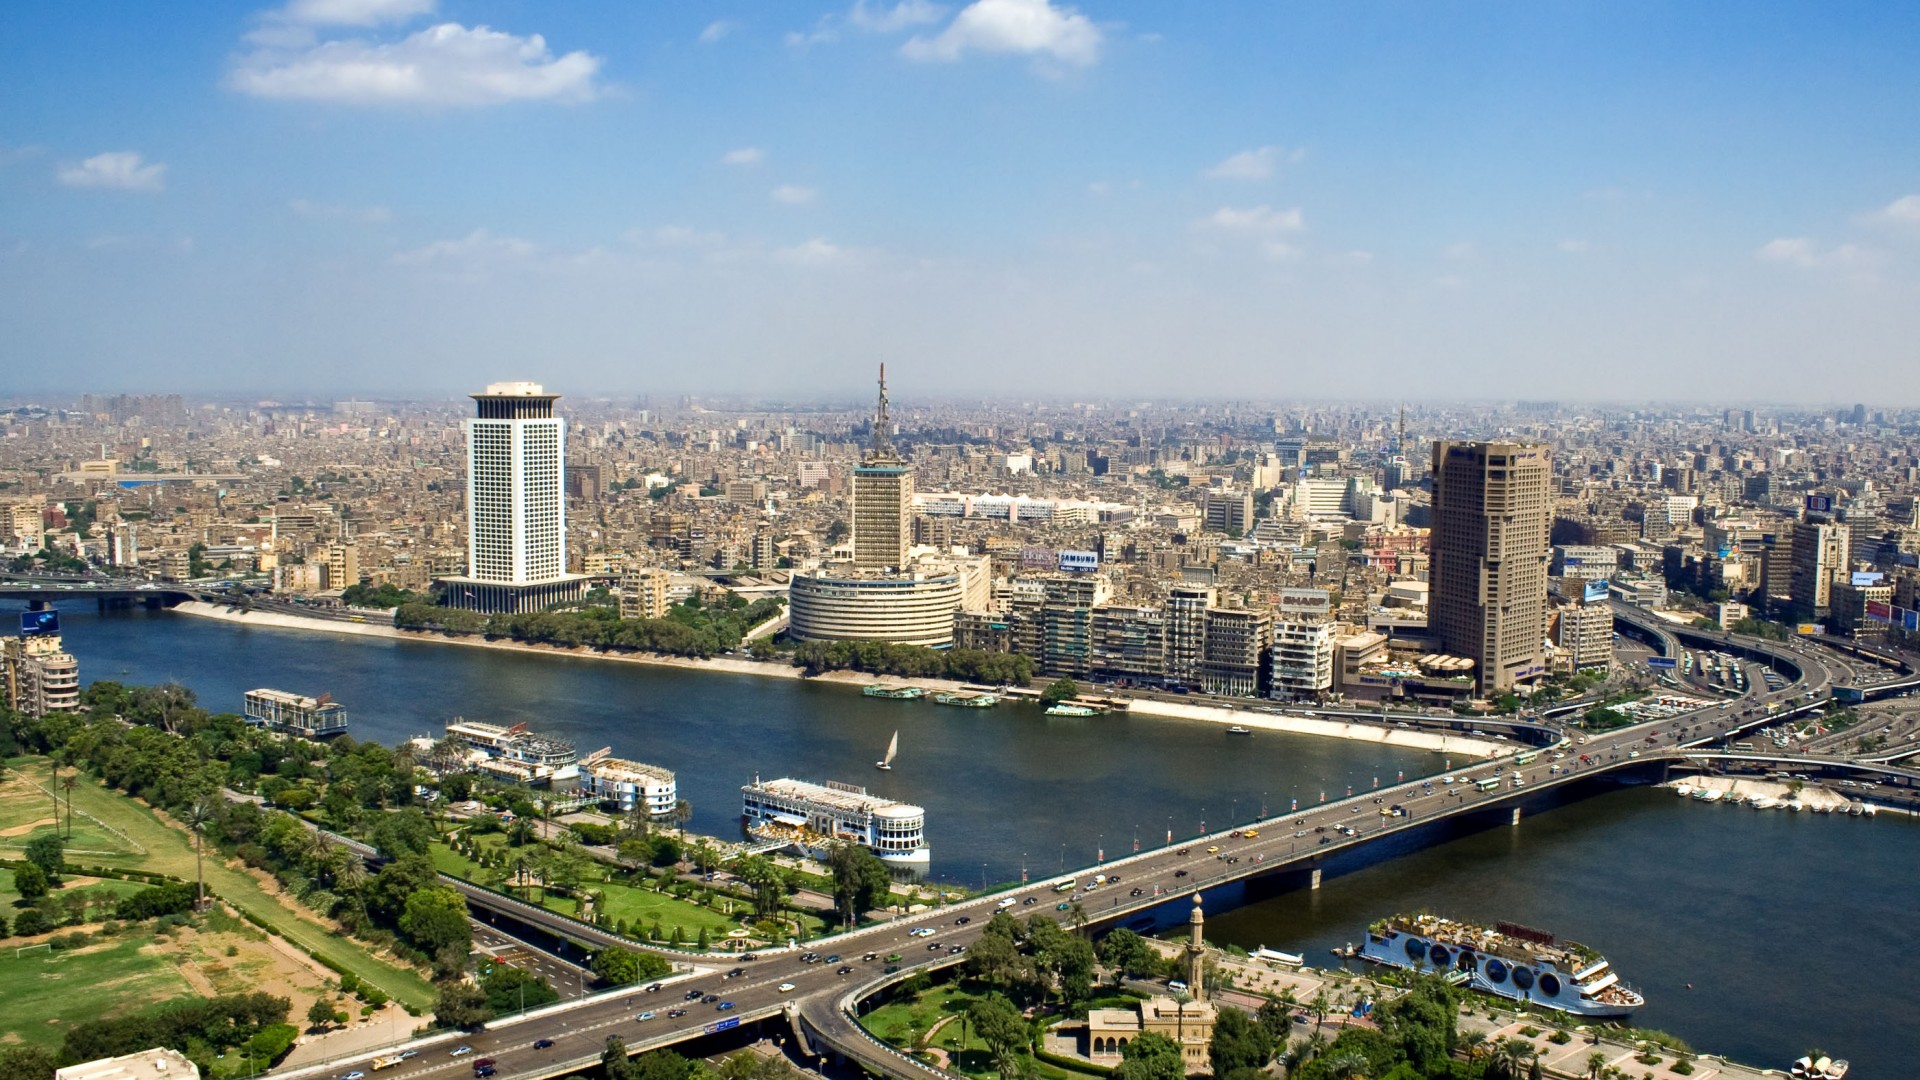 Will a significant increase in resignations affect the Egyptian labor market?